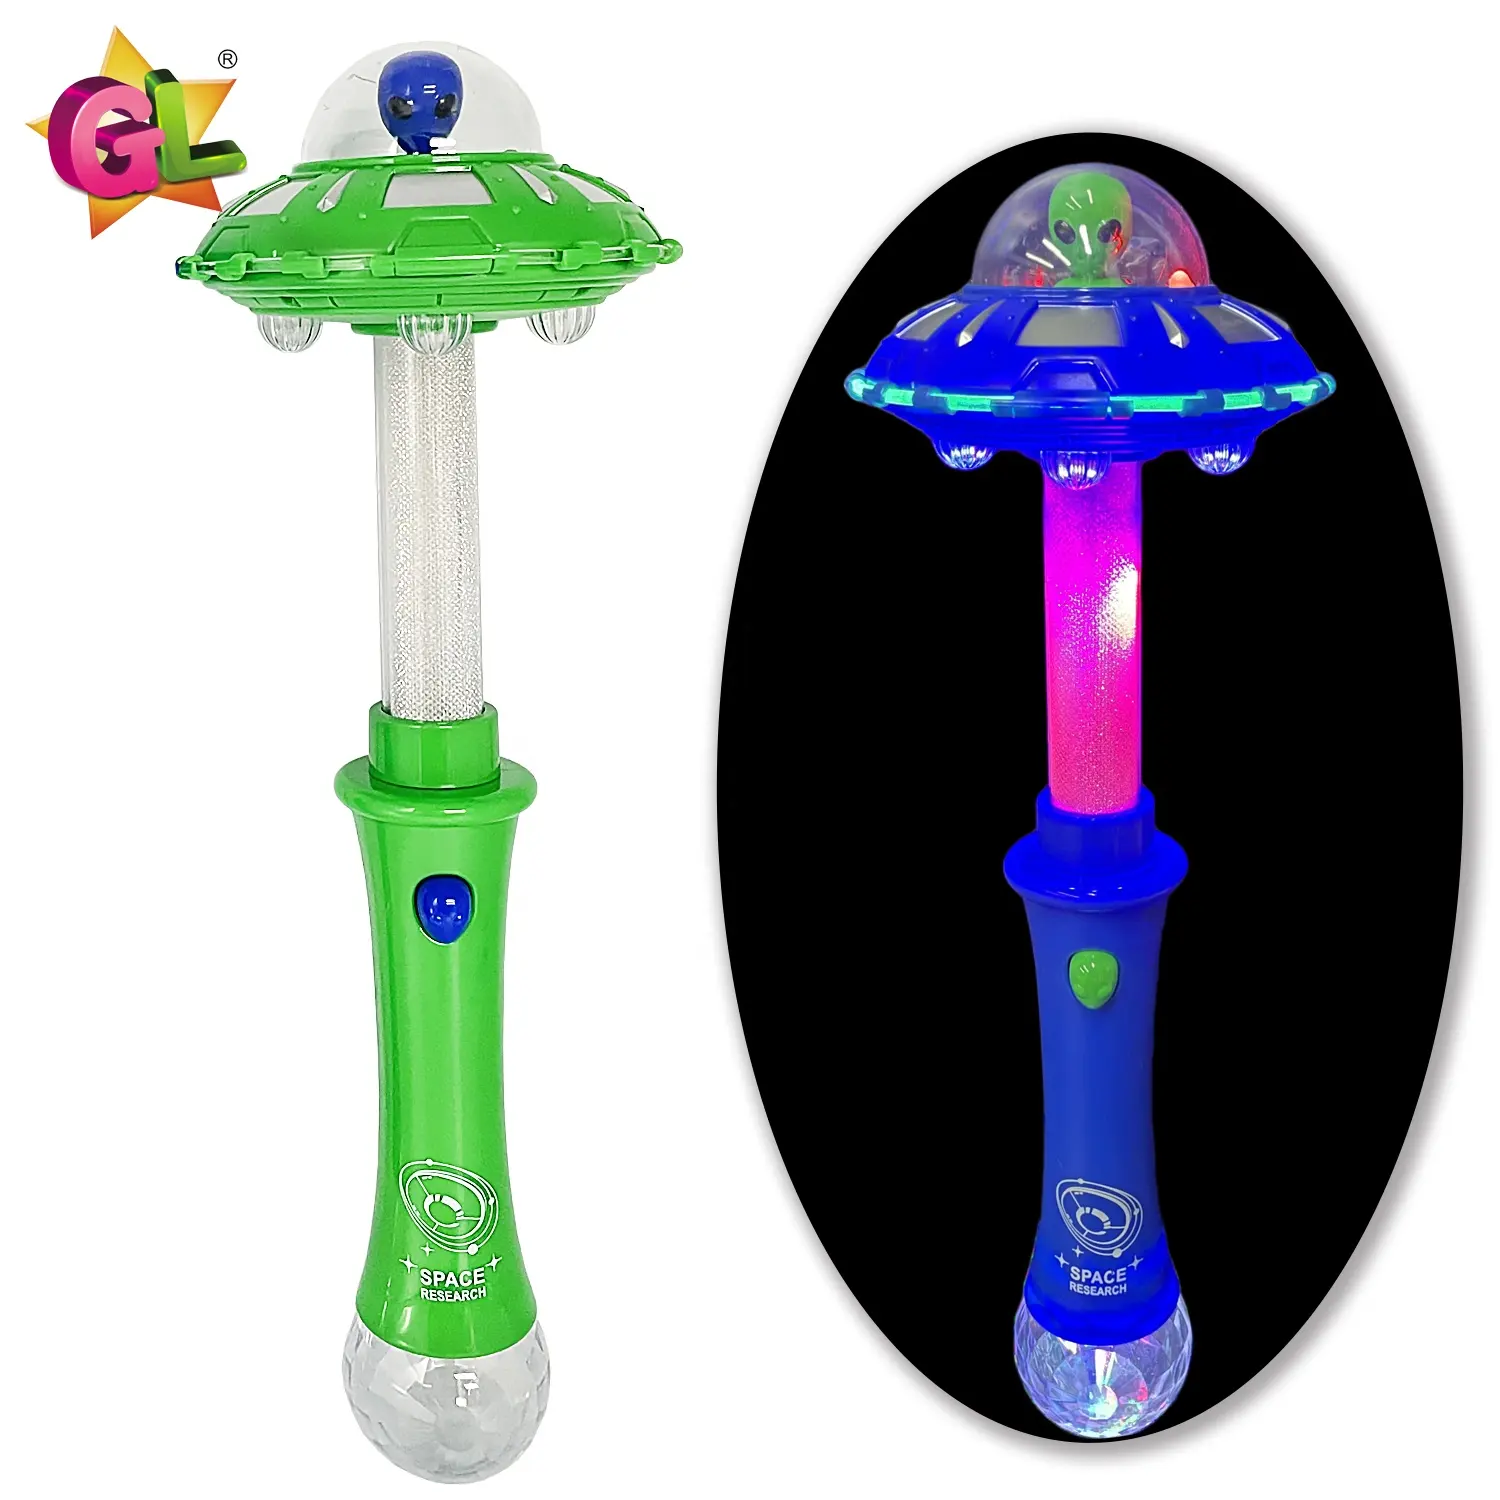 Most popular items light up Space flying saucer wand with blue green UFO plastic toy led light up toys